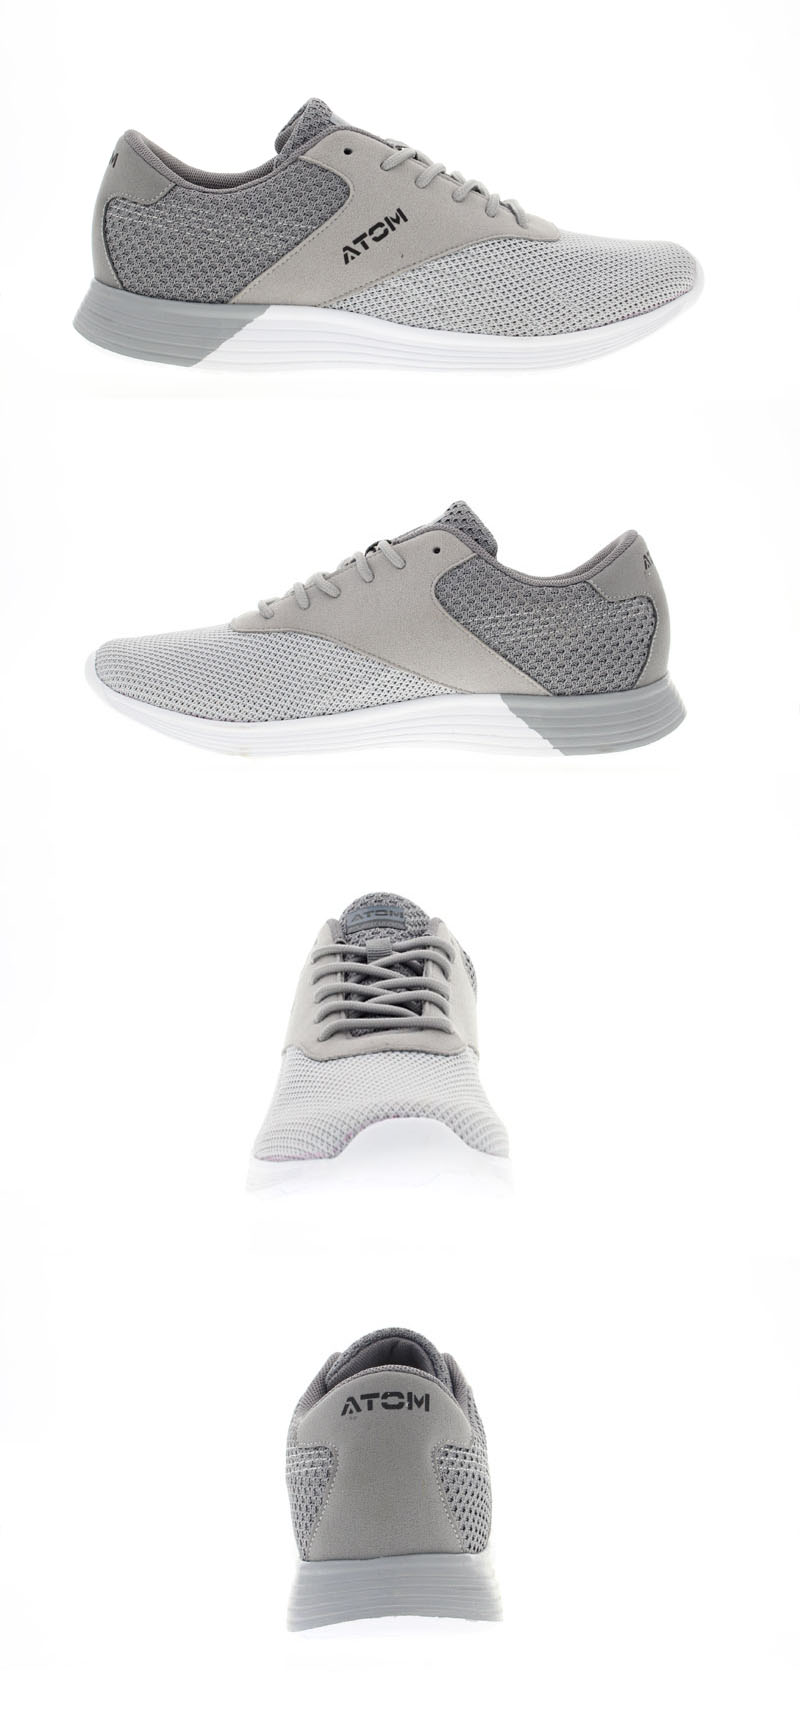 Steady Mix grey color upper